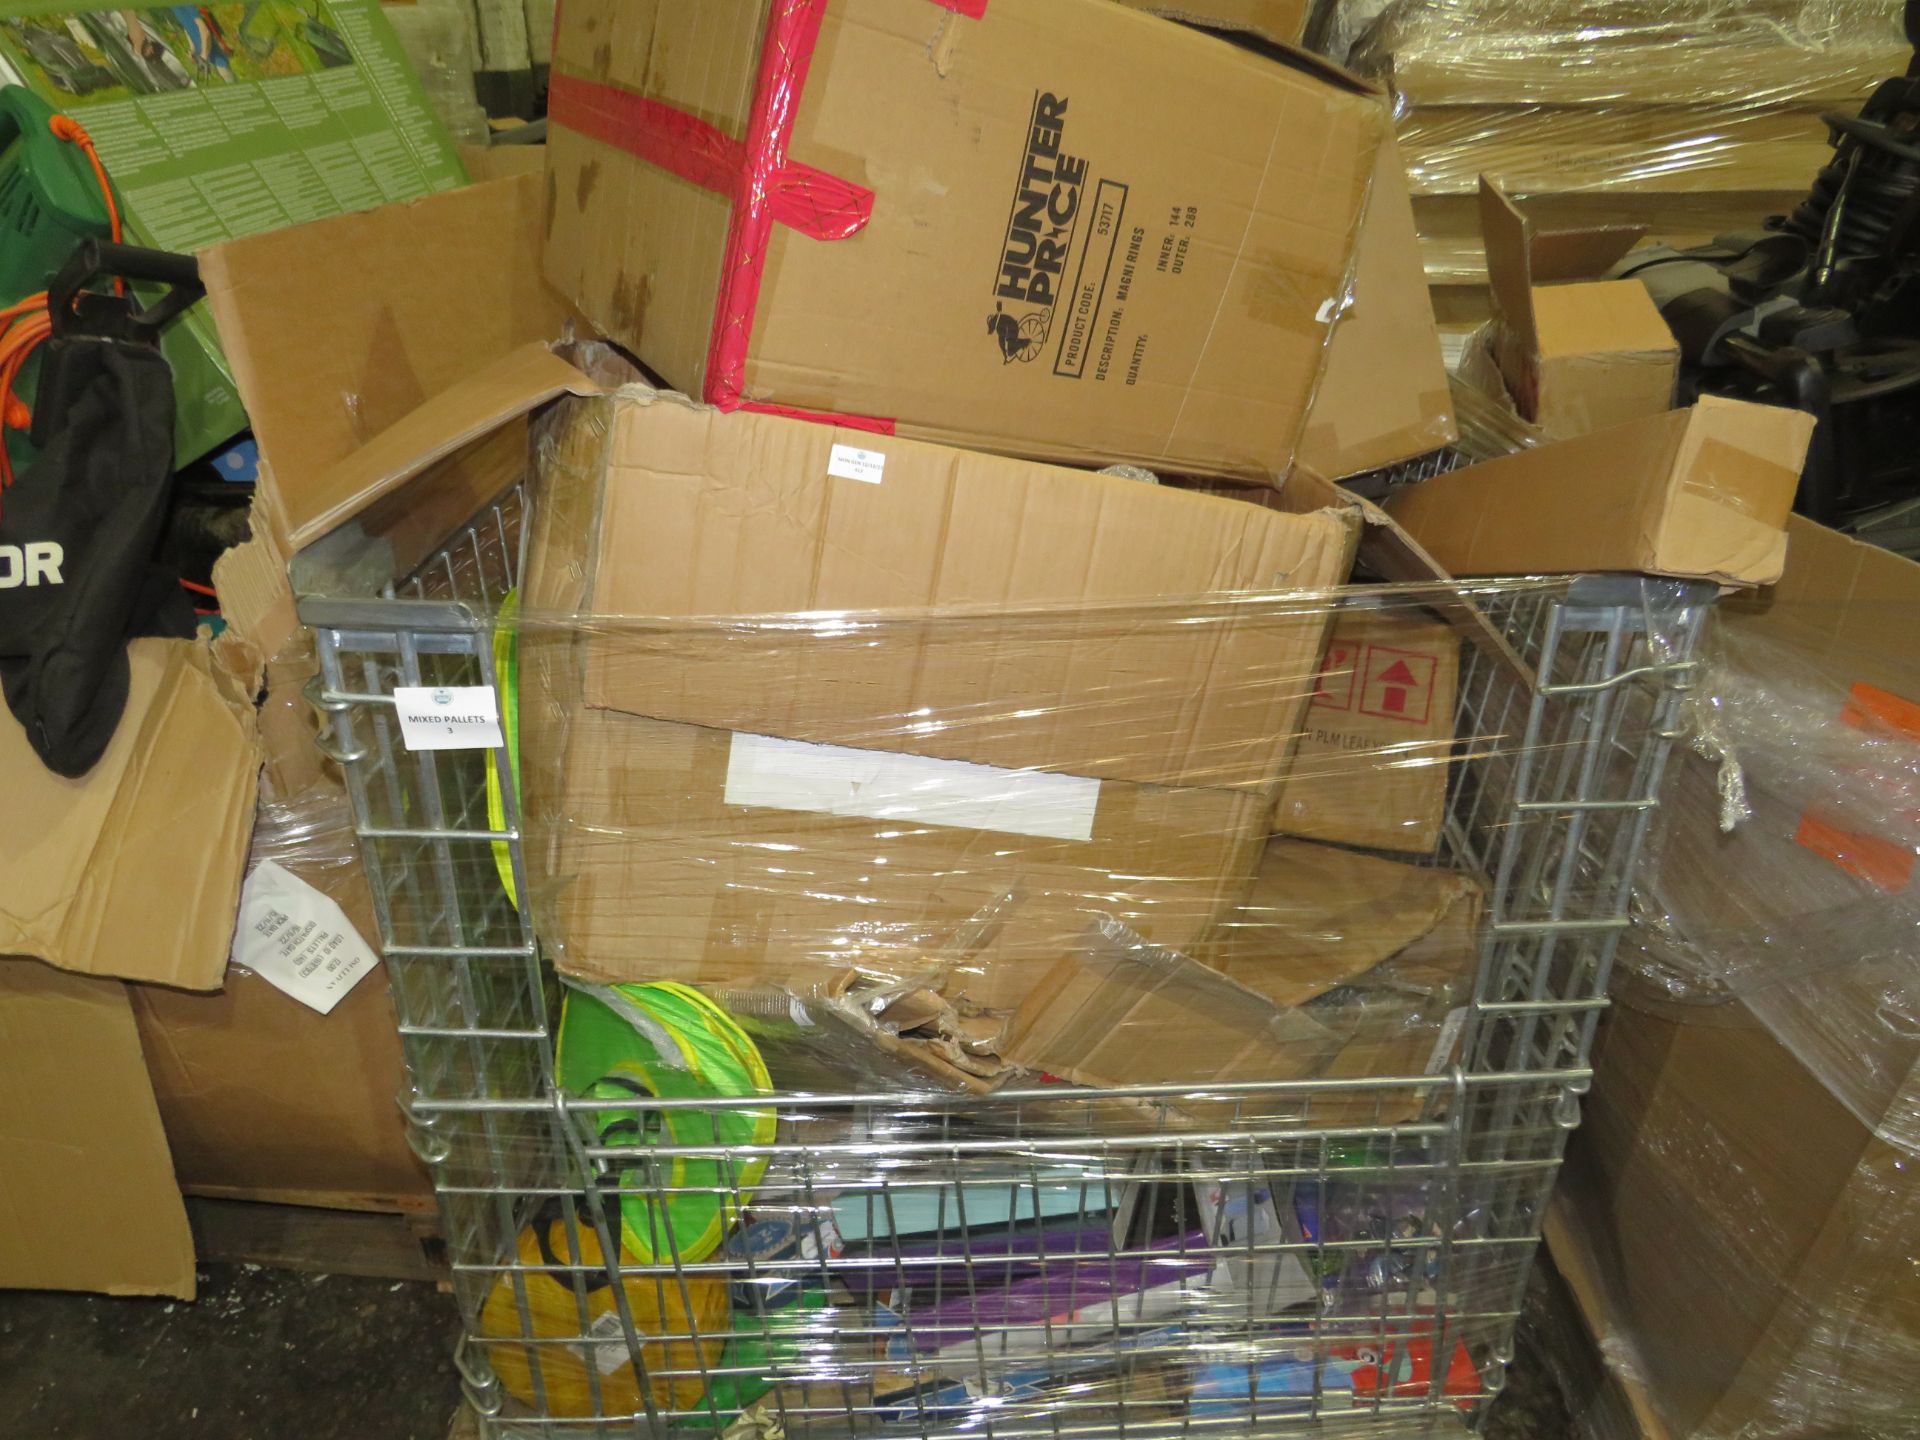 1x salvage pallet containing Mixed returned Items - Items Conditions vary from poorly damaged /